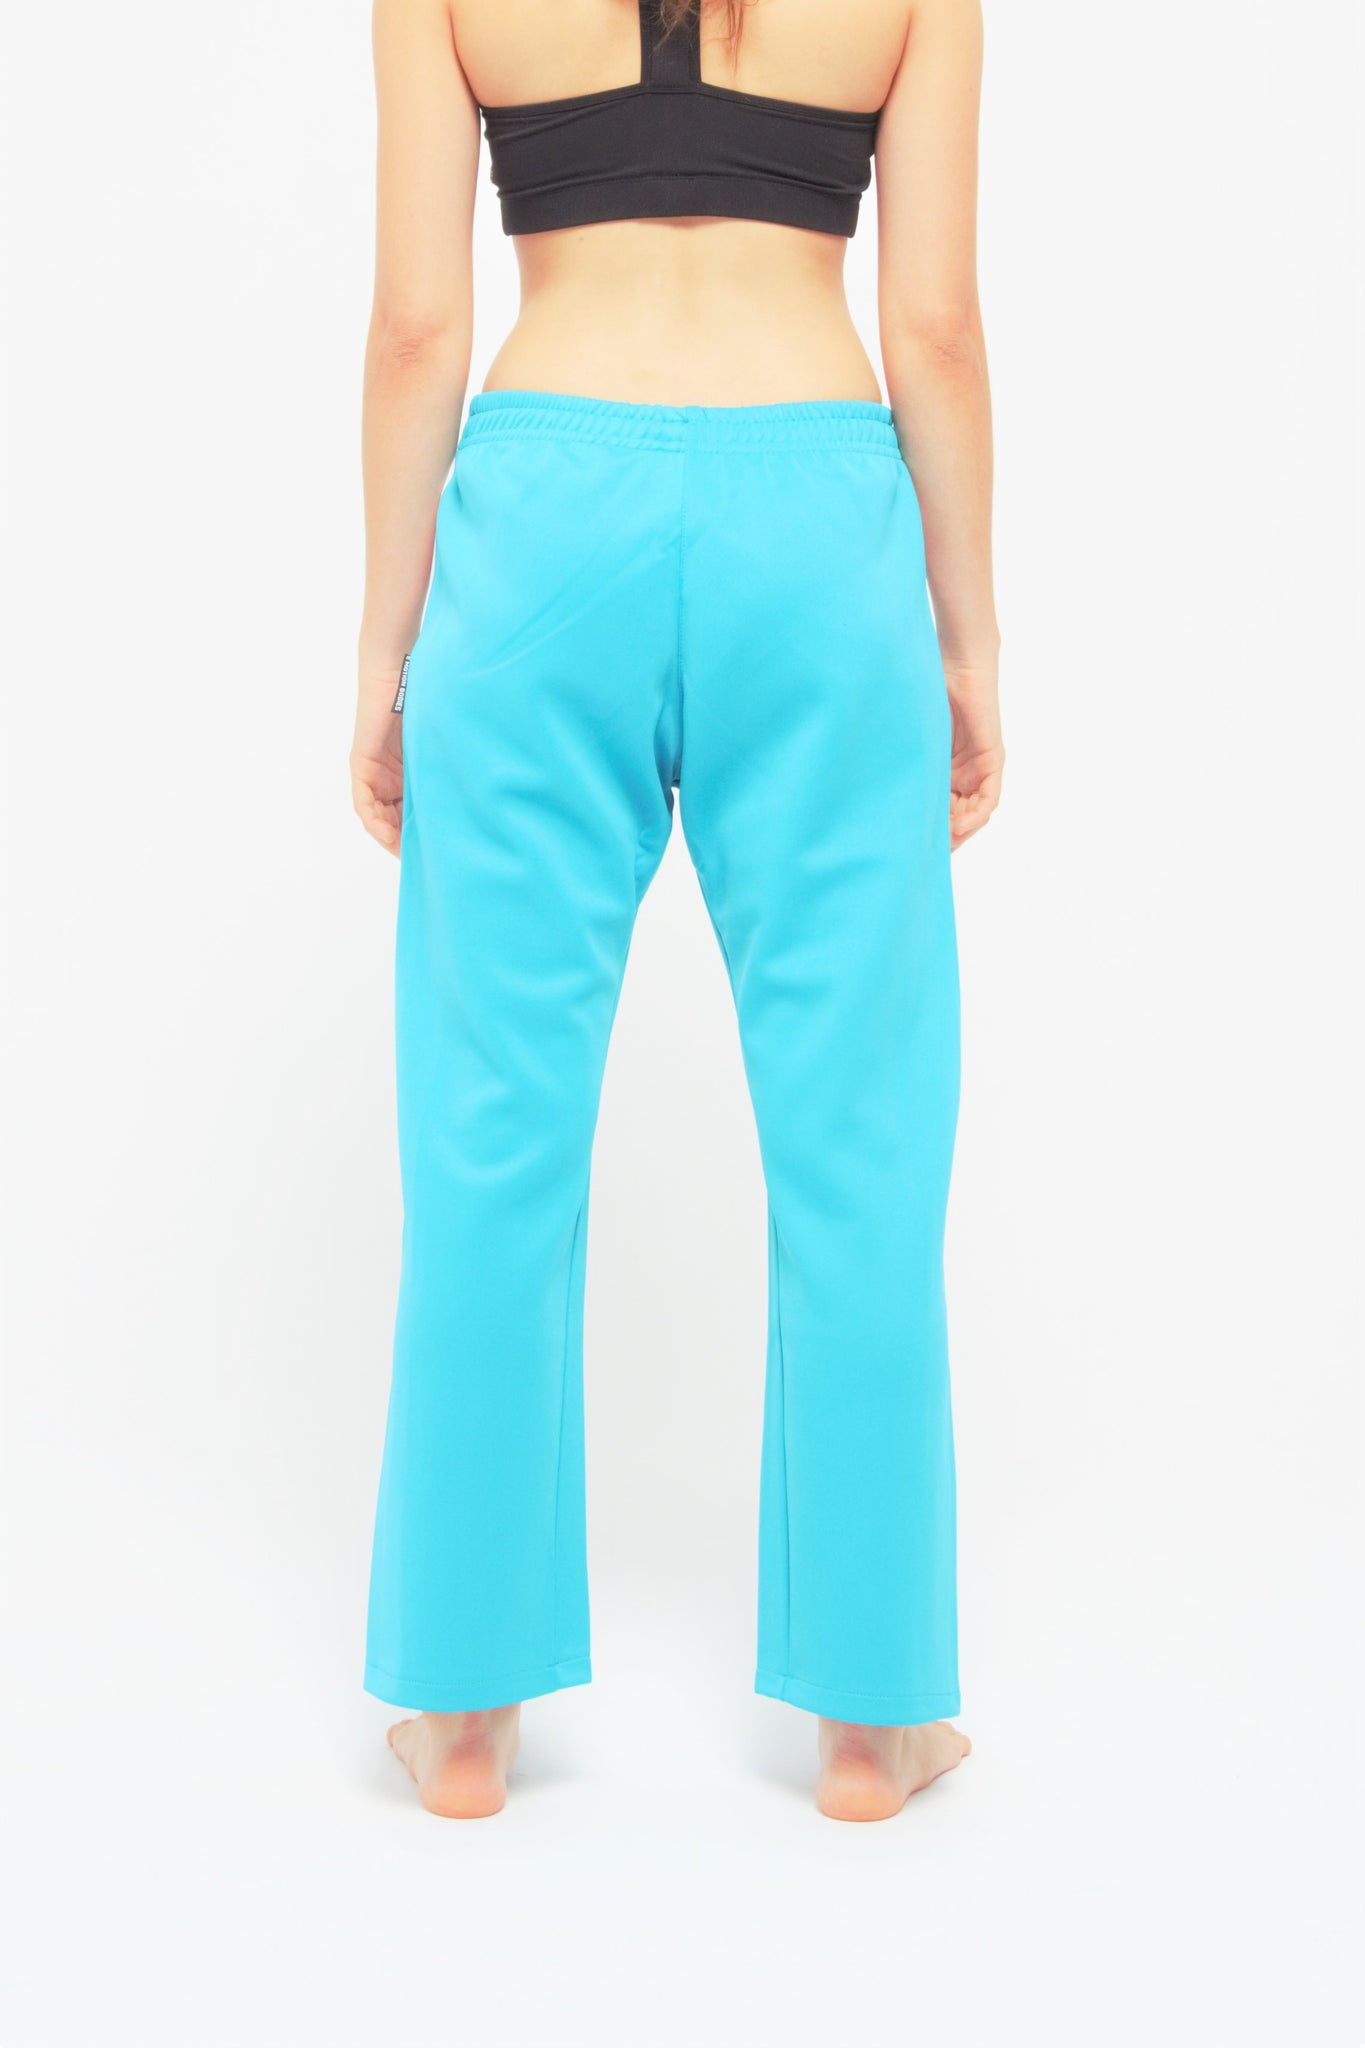 Flying Contemporary Dance Pants - Pink & White